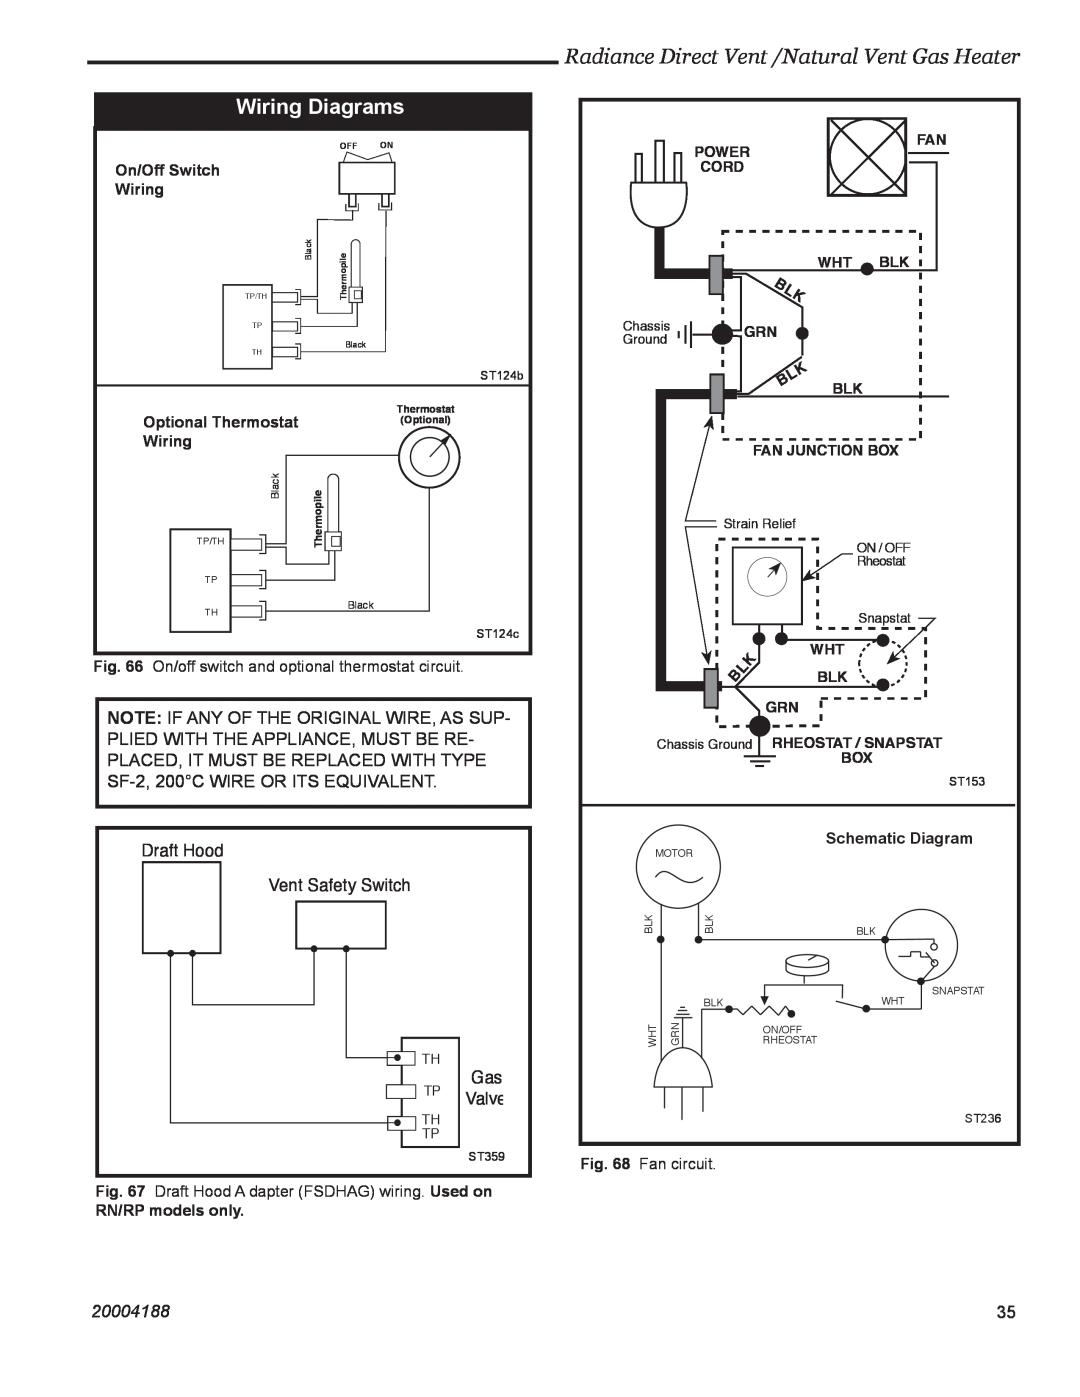 Vermont Casting RDVOD 3390 Wiring Diagrams, Radiance Direct Vent /Natural Vent Gas Heater, Draft Hood Vent Safety Switch 